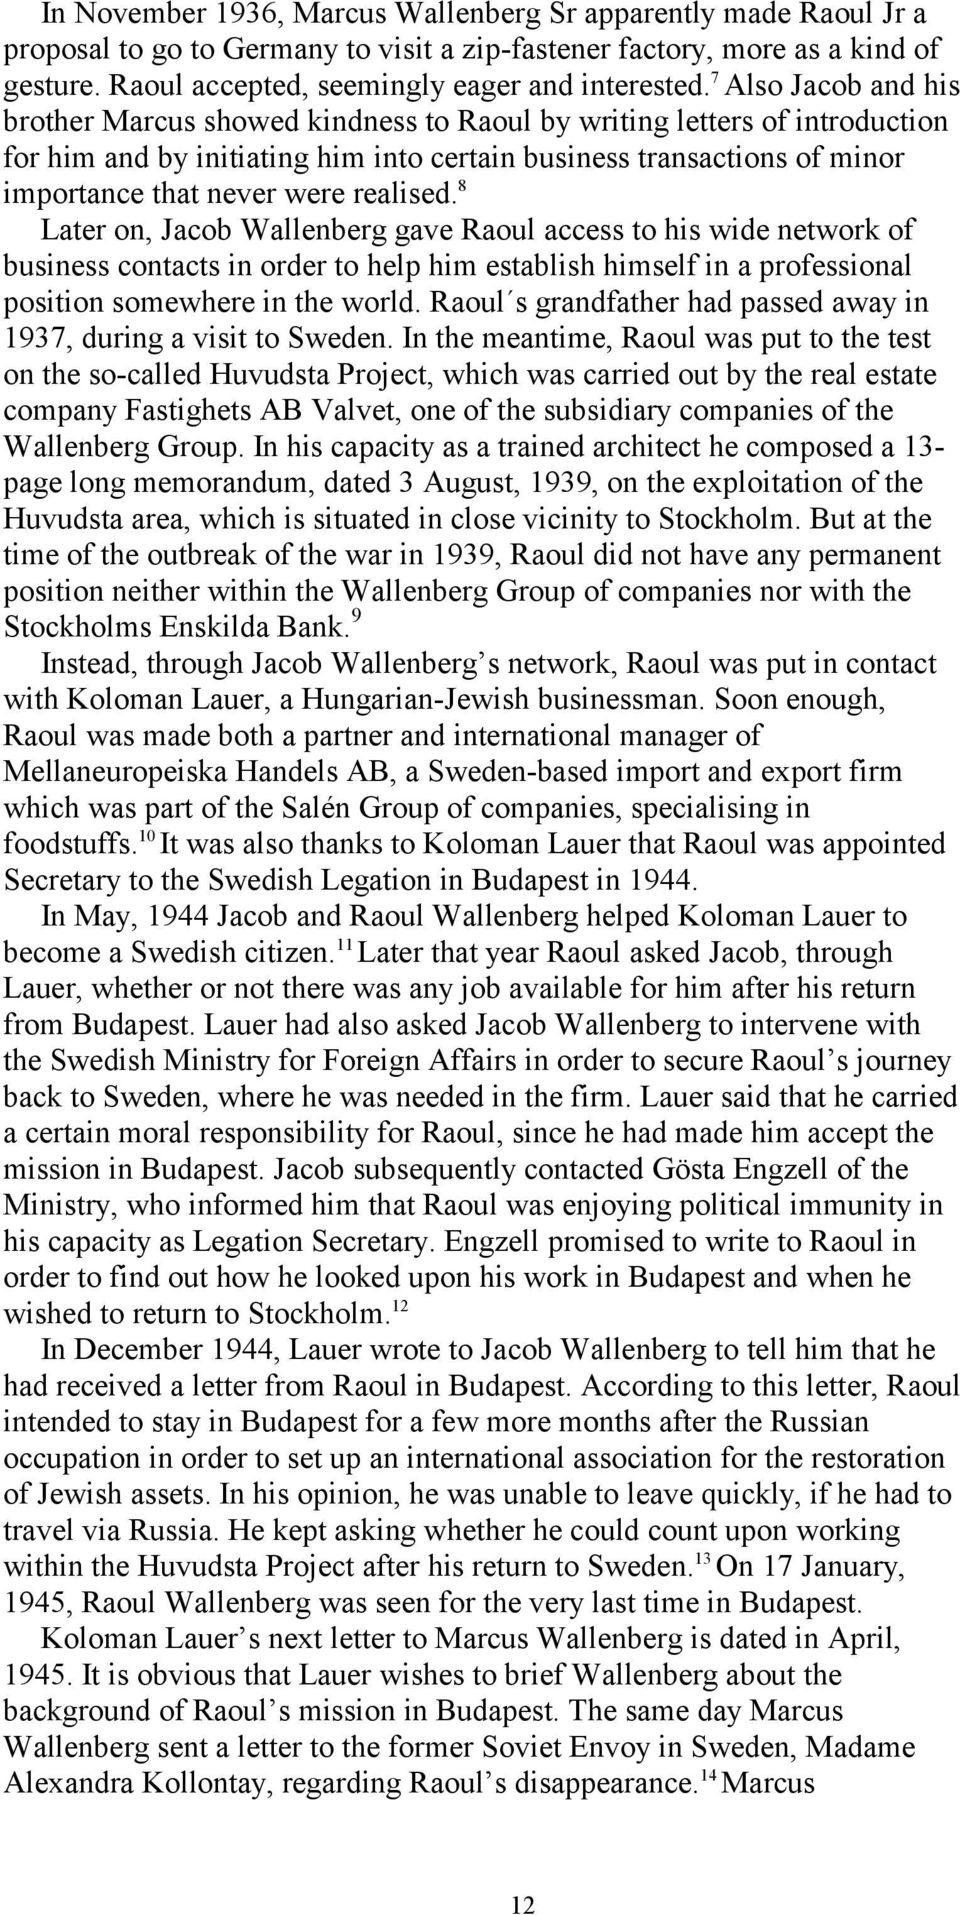 realised. 8 Later on, Jacob Wallenberg gave Raoul access to his wide network of business contacts in order to help him establish himself in a professional position somewhere in the world.